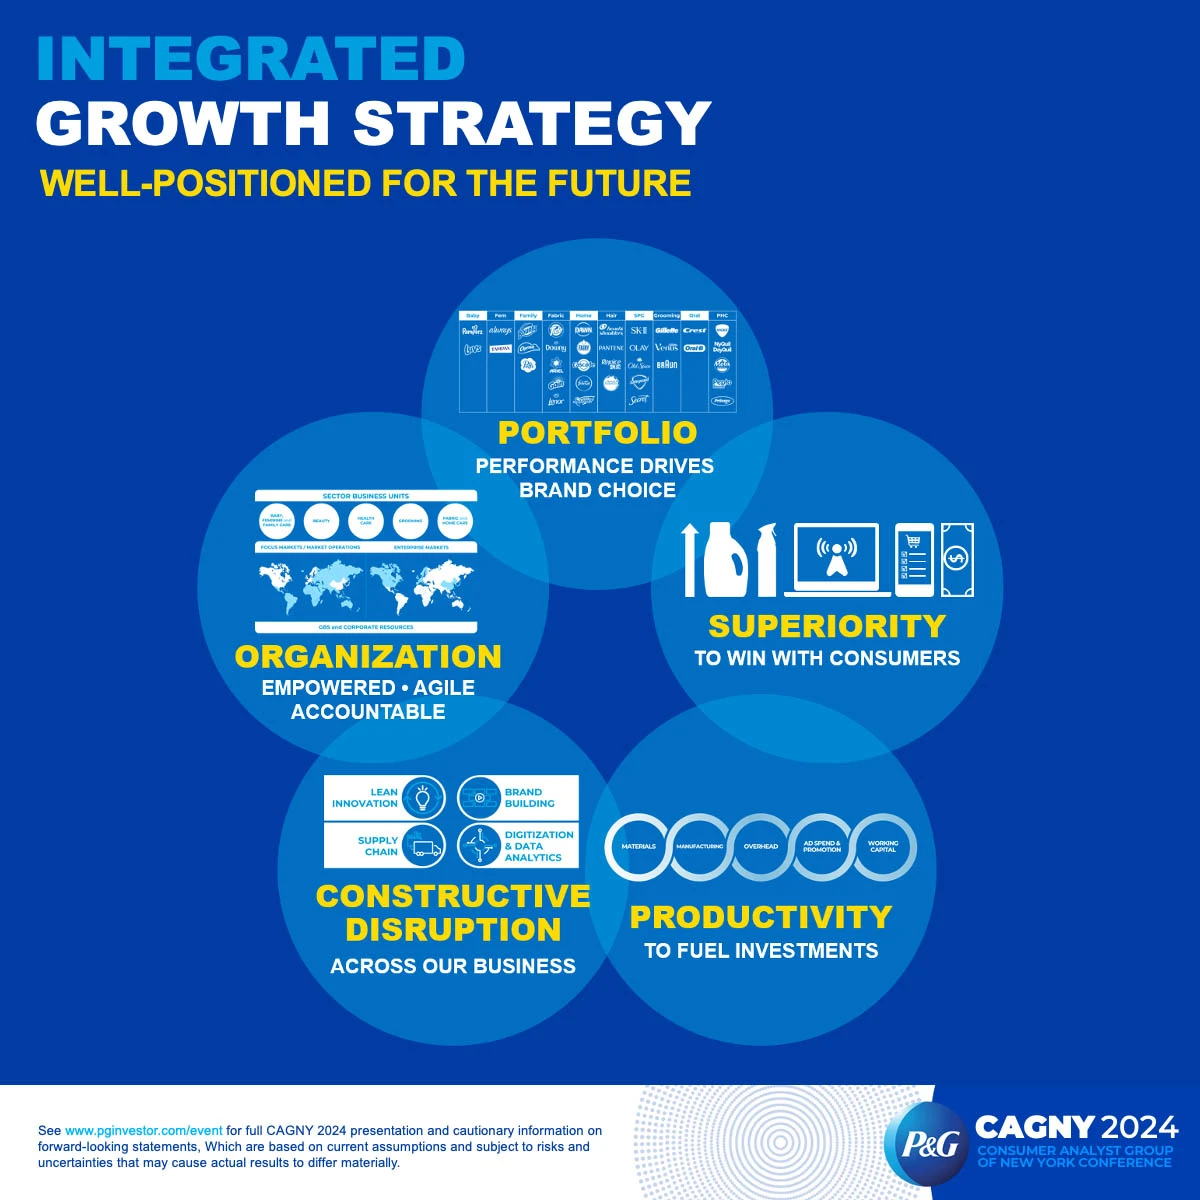 Five blue, white and yellow illustrated circles outline Procter & Gamble's integrated growth strategy. Images and text outline the five areas of this strategy: portfolio, superiority, productivity, constructive disruption and organization.